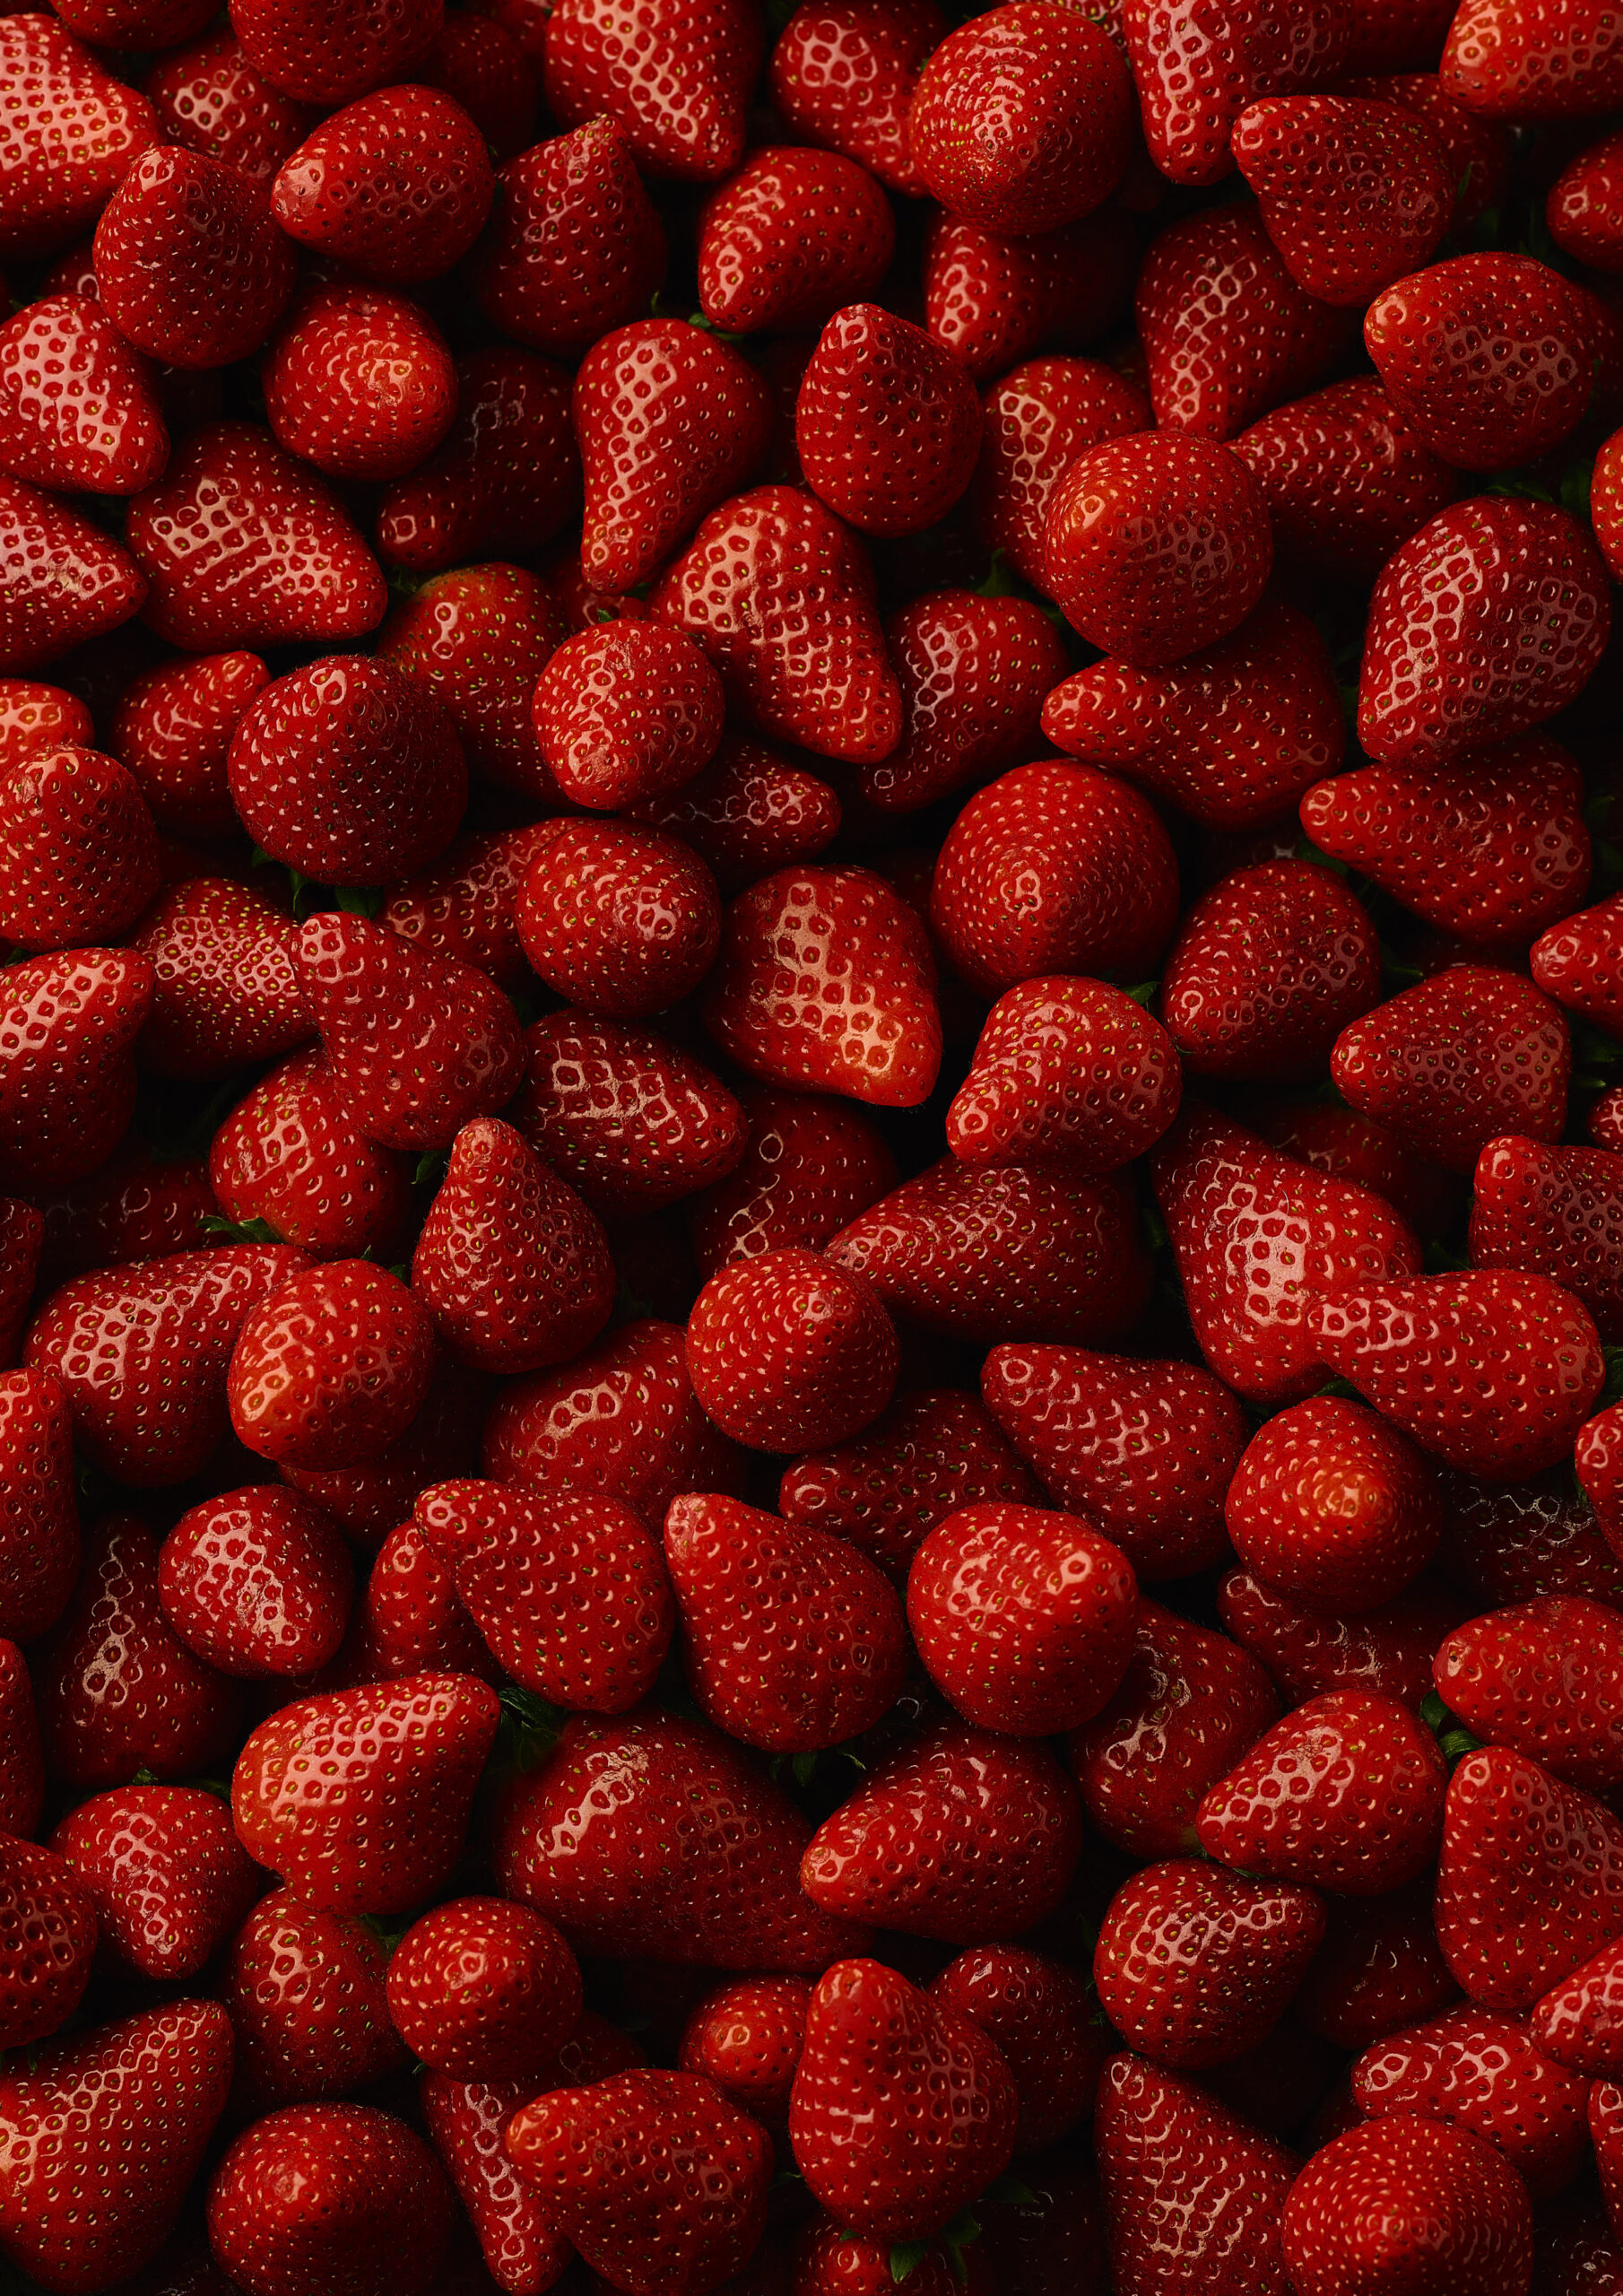 Food and Drink Photography | Strawberries